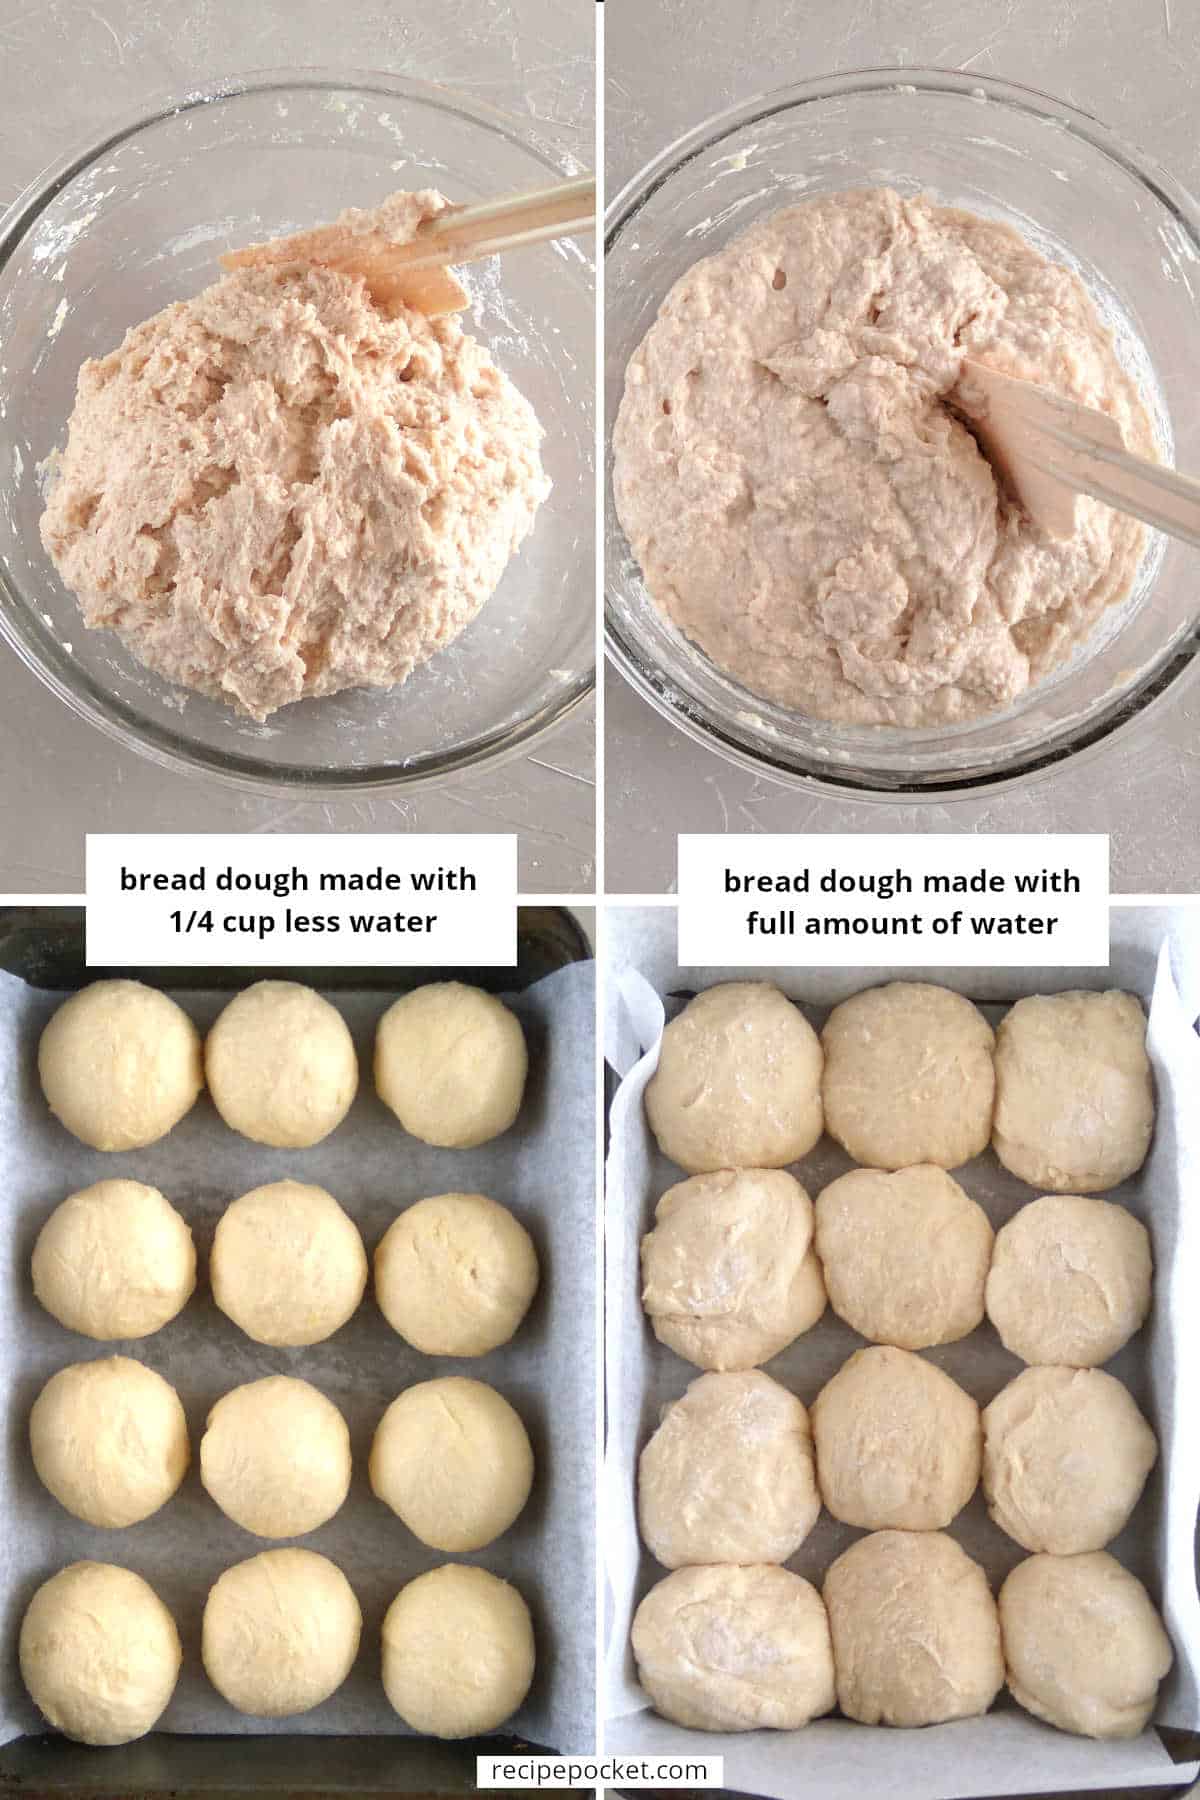 Image showing a comparsion of doughs made with different amounts of liquid.